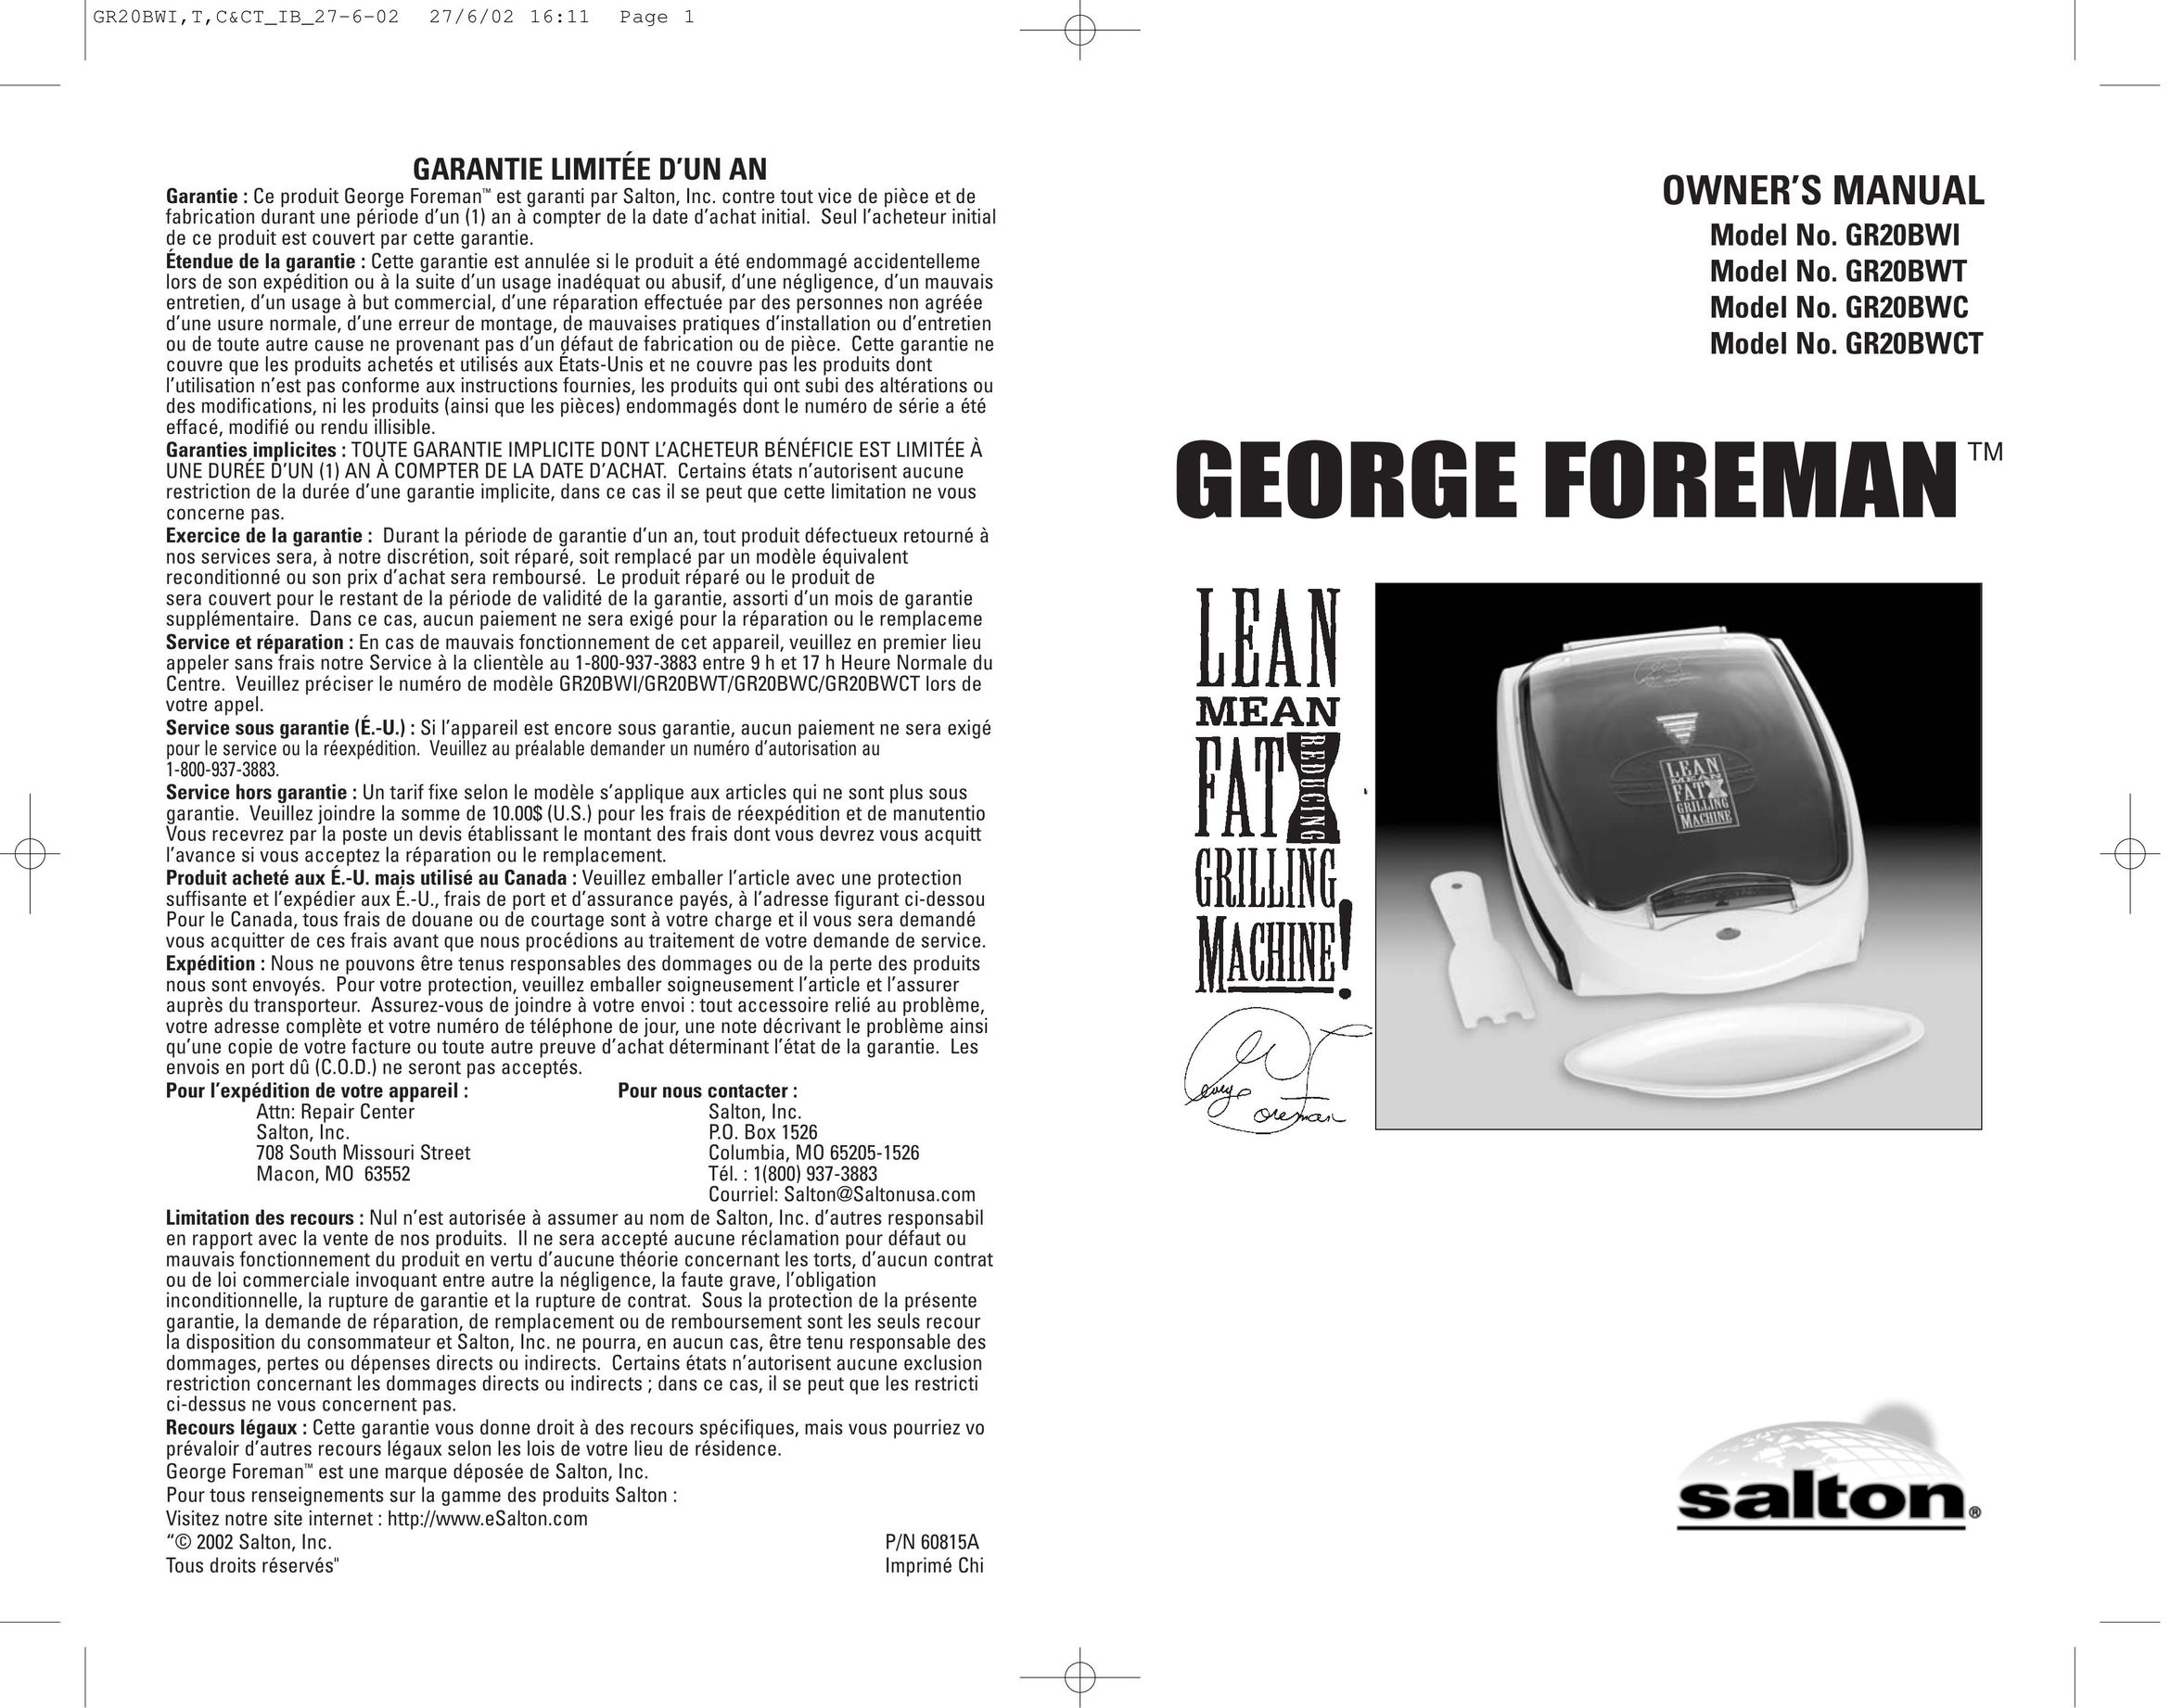 George Foreman GR20BWI Kitchen Grill User Manual